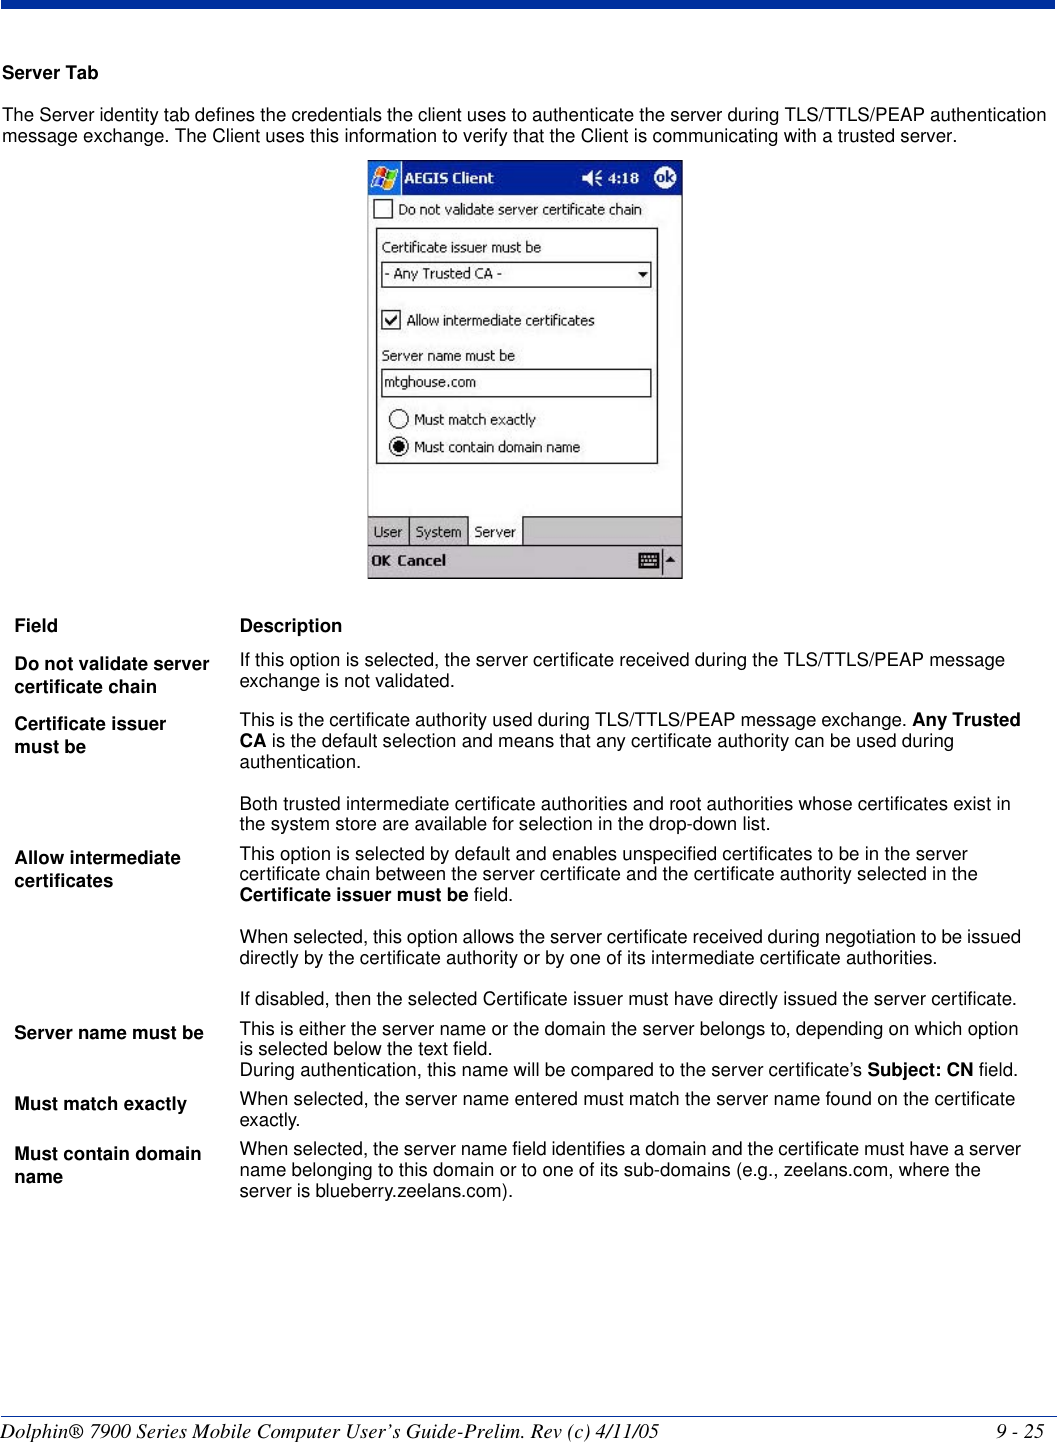 Dolphin® 7900 Series Mobile Computer User’s Guide-Prelim. Rev (c) 4/11/05 9 - 25Server TabThe Server identity tab defines the credentials the client uses to authenticate the server during TLS/TTLS/PEAP authentication message exchange. The Client uses this information to verify that the Client is communicating with a trusted server. Field DescriptionDo not validate server certificate chainIf this option is selected, the server certificate received during the TLS/TTLS/PEAP message exchange is not validated.Certificate issuer must be This is the certificate authority used during TLS/TTLS/PEAP message exchange. Any Trusted CA is the default selection and means that any certificate authority can be used during authentication.Both trusted intermediate certificate authorities and root authorities whose certificates exist in the system store are available for selection in the drop-down list. Allow intermediate certificatesThis option is selected by default and enables unspecified certificates to be in the server certificate chain between the server certificate and the certificate authority selected in the Certificate issuer must be field. When selected, this option allows the server certificate received during negotiation to be issued directly by the certificate authority or by one of its intermediate certificate authorities. If disabled, then the selected Certificate issuer must have directly issued the server certificate.Server name must be This is either the server name or the domain the server belongs to, depending on which option is selected below the text field.During authentication, this name will be compared to the server certificate’s Subject: CN field.Must match exactly When selected, the server name entered must match the server name found on the certificate exactly.Must contain domain nameWhen selected, the server name field identifies a domain and the certificate must have a server name belonging to this domain or to one of its sub-domains (e.g., zeelans.com, where the server is blueberry.zeelans.com).